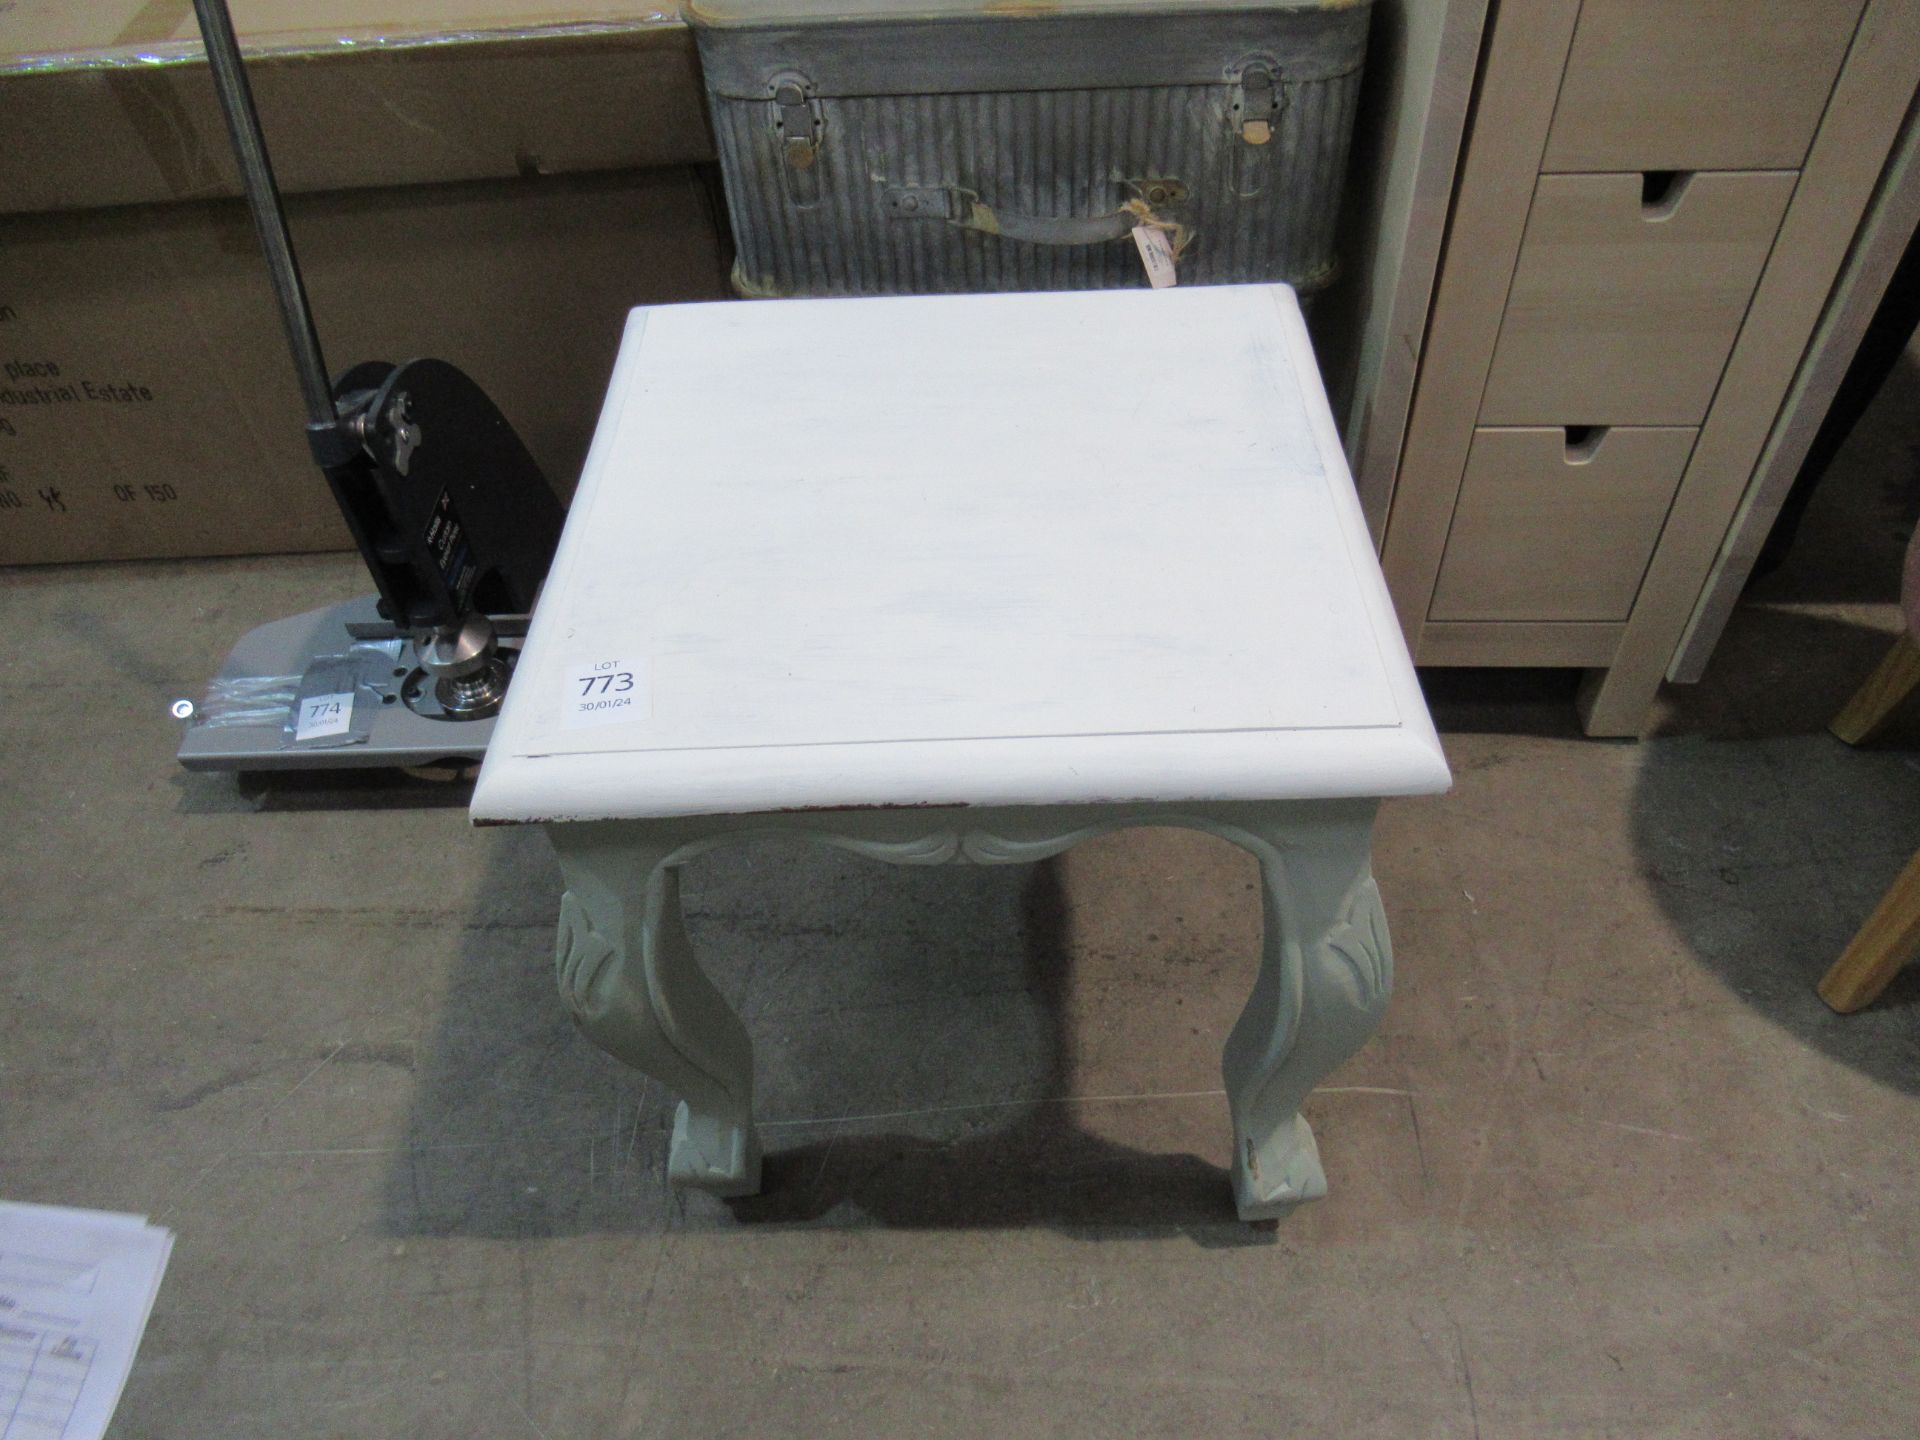 Miscellaneous Furniture to include 2x Painted Tables and a Suitcase Styled Table - Image 2 of 5